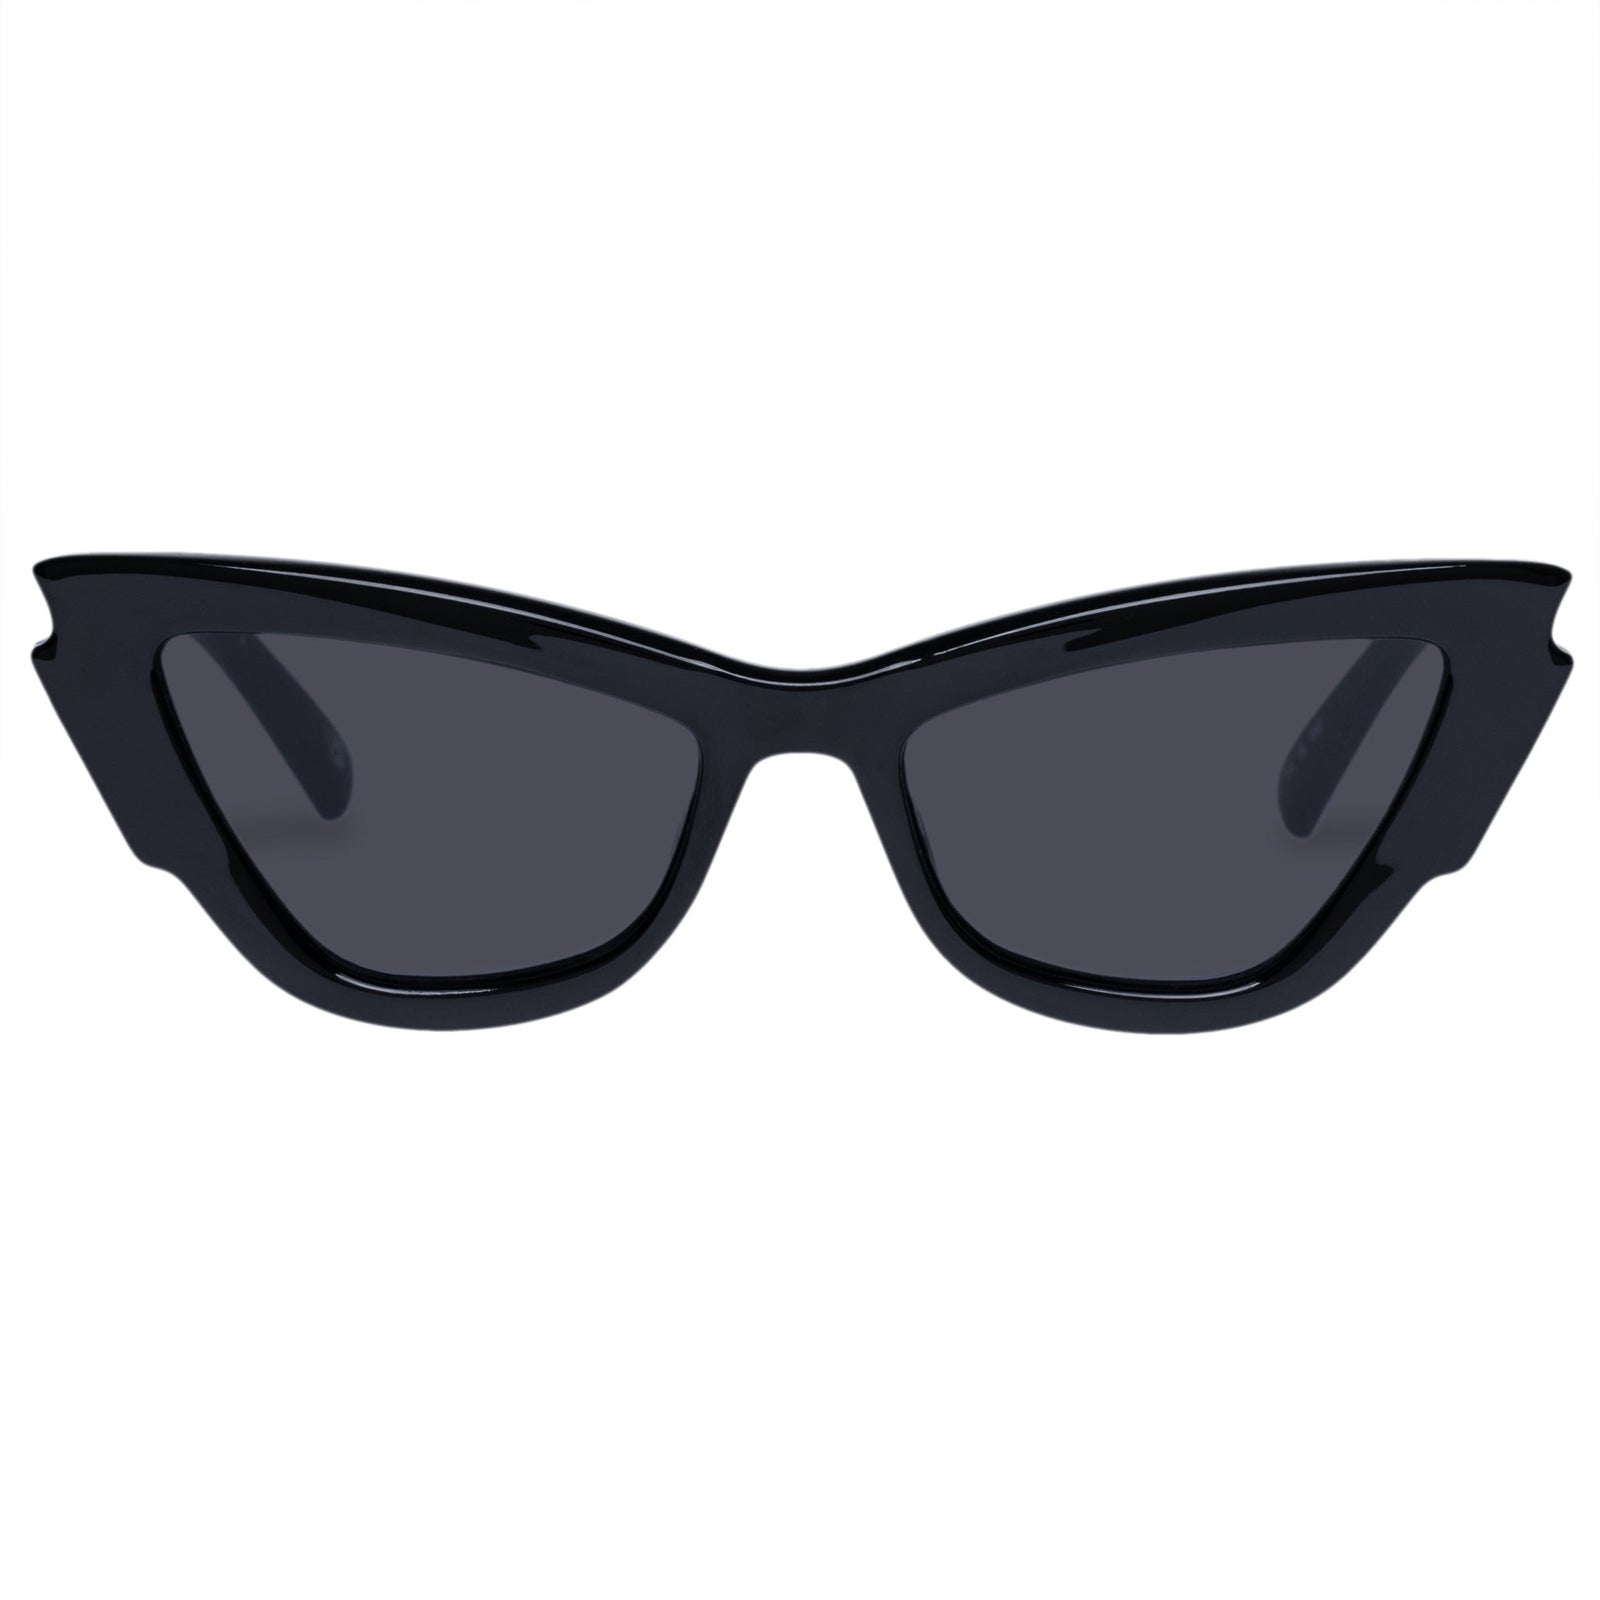 What Role Do Sunglasses Play in Preventing Eye Strain and Fatigue?